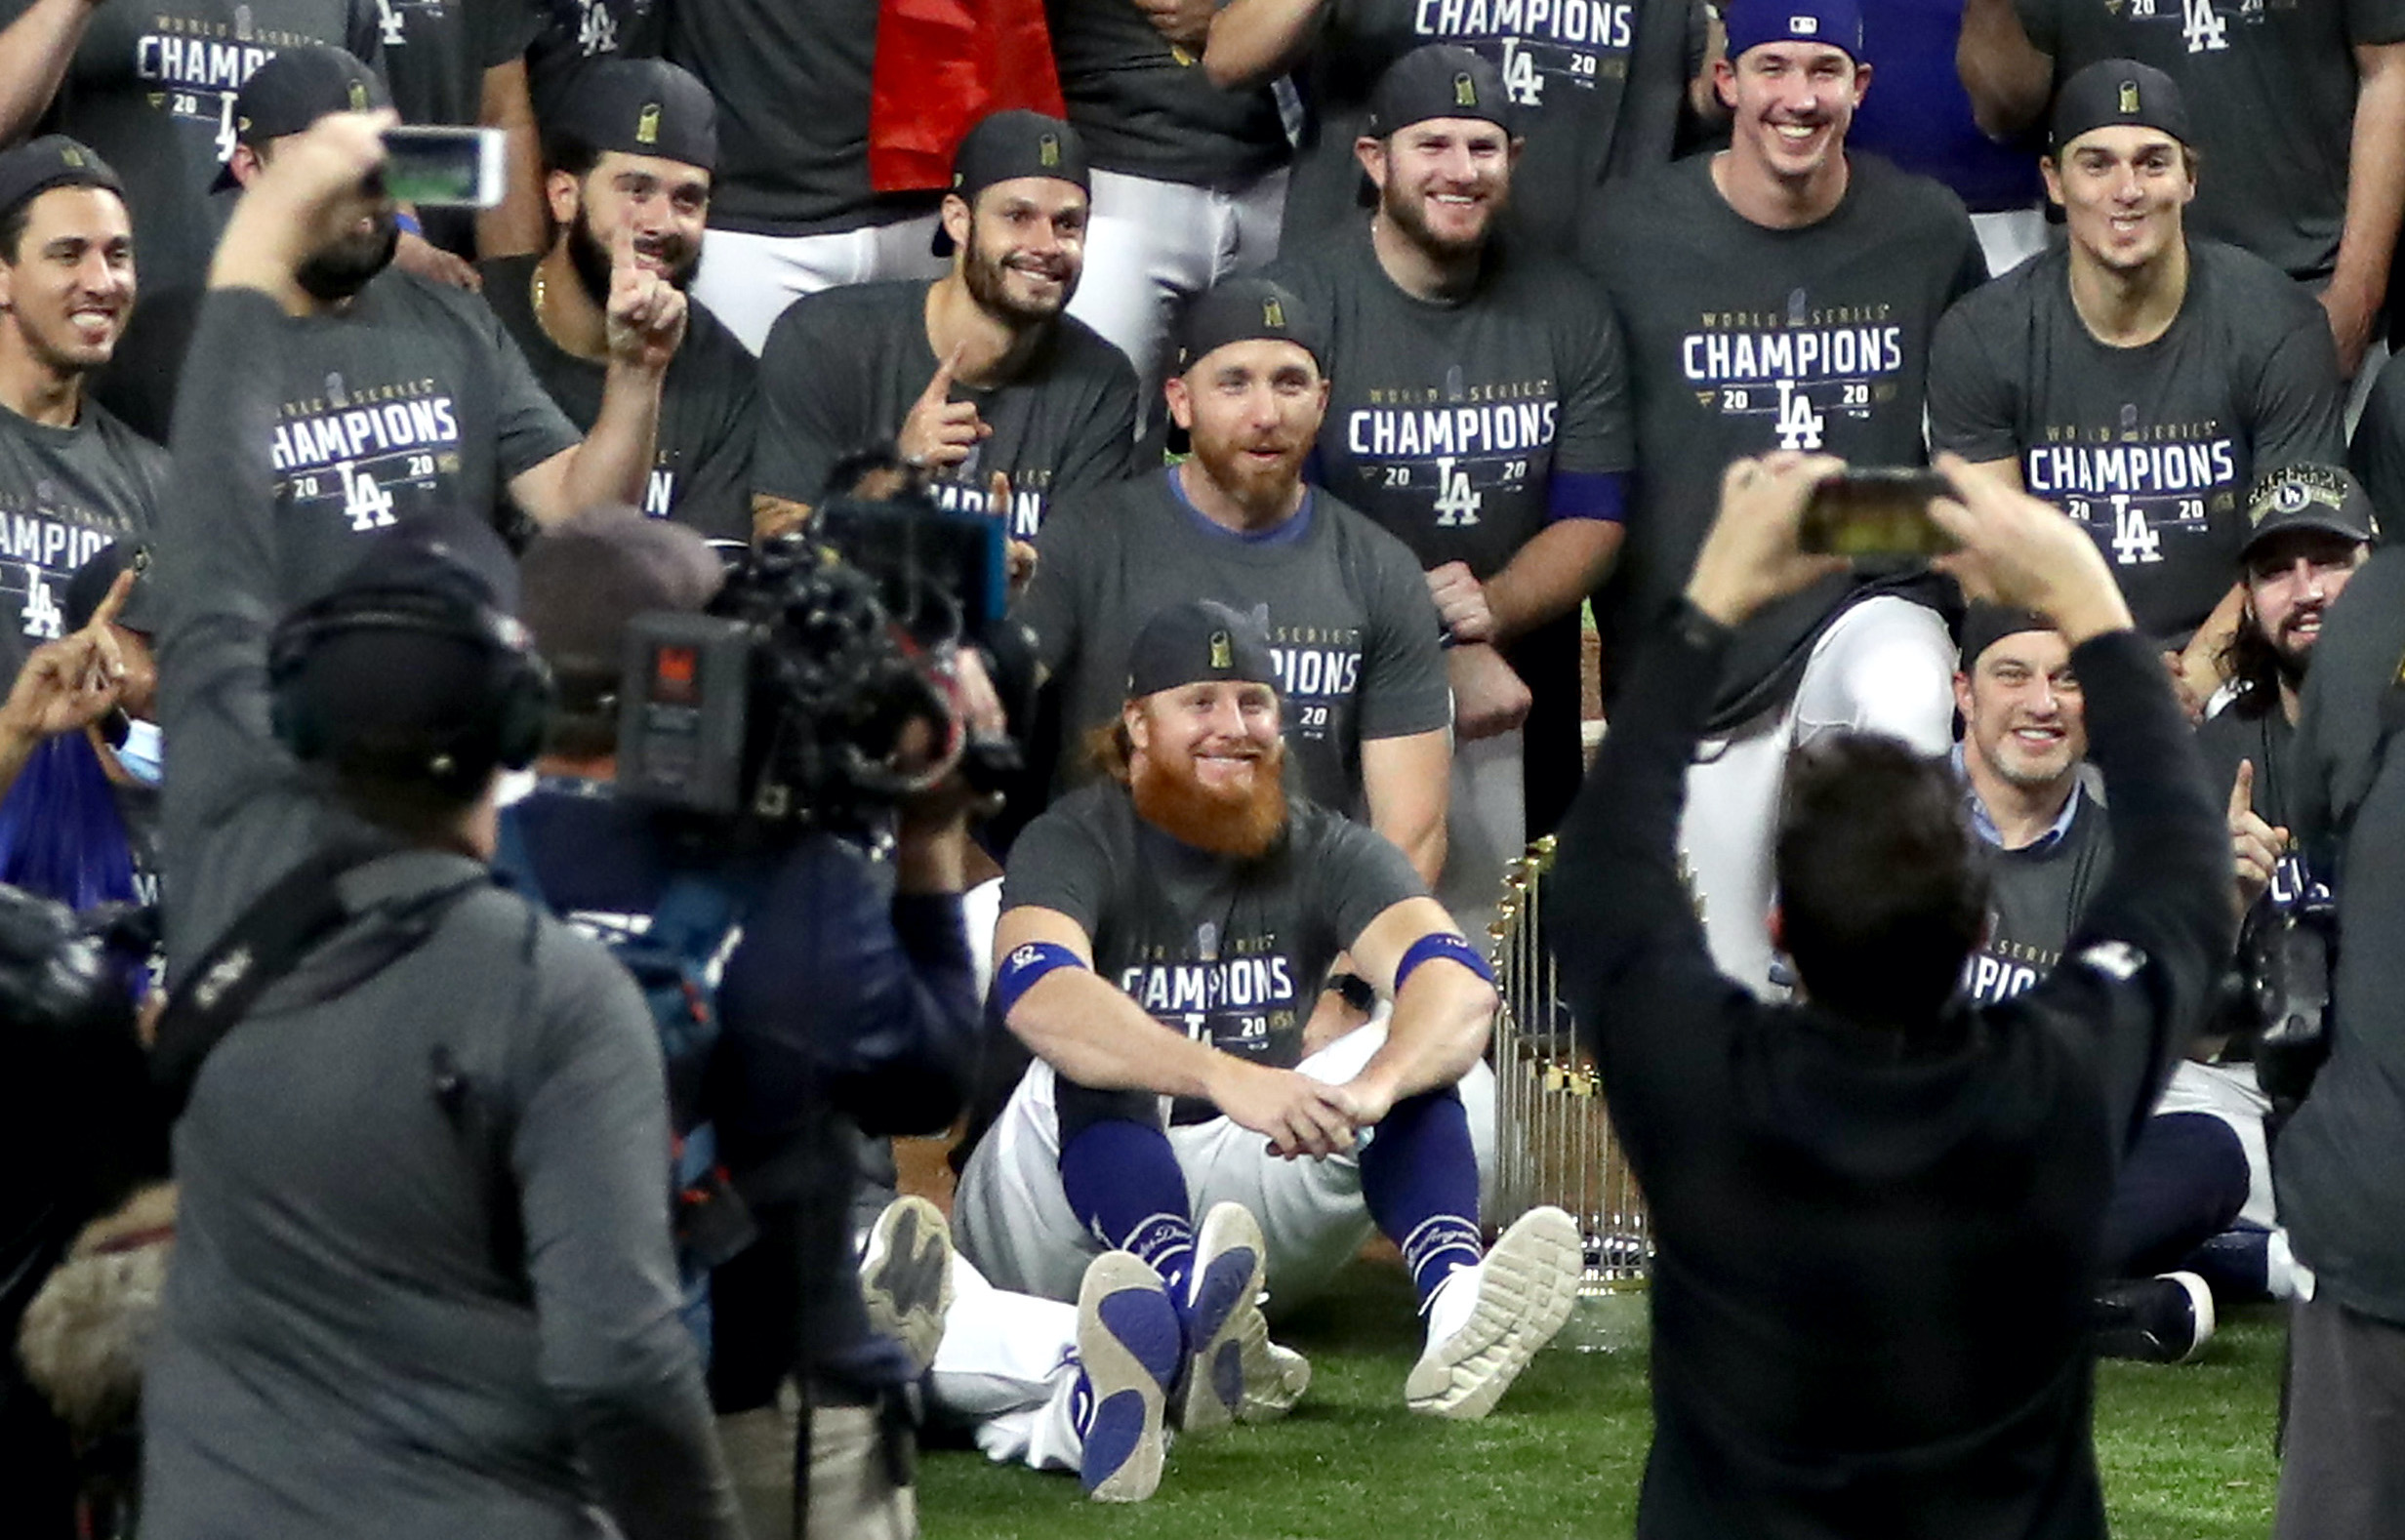 ARLINGTON, TEXAS - OCTOBER 27: Justin Turner #10 and the Los Angeles Dodgers pose for a photo after defeating the Tampa Bay Rays 3-1 in Game Six to win the 2020 MLB World Series at Globe Life Field on October 27, 2020 in Arlington, Texas. (Photo by Ronald Martinez/Getty Images)